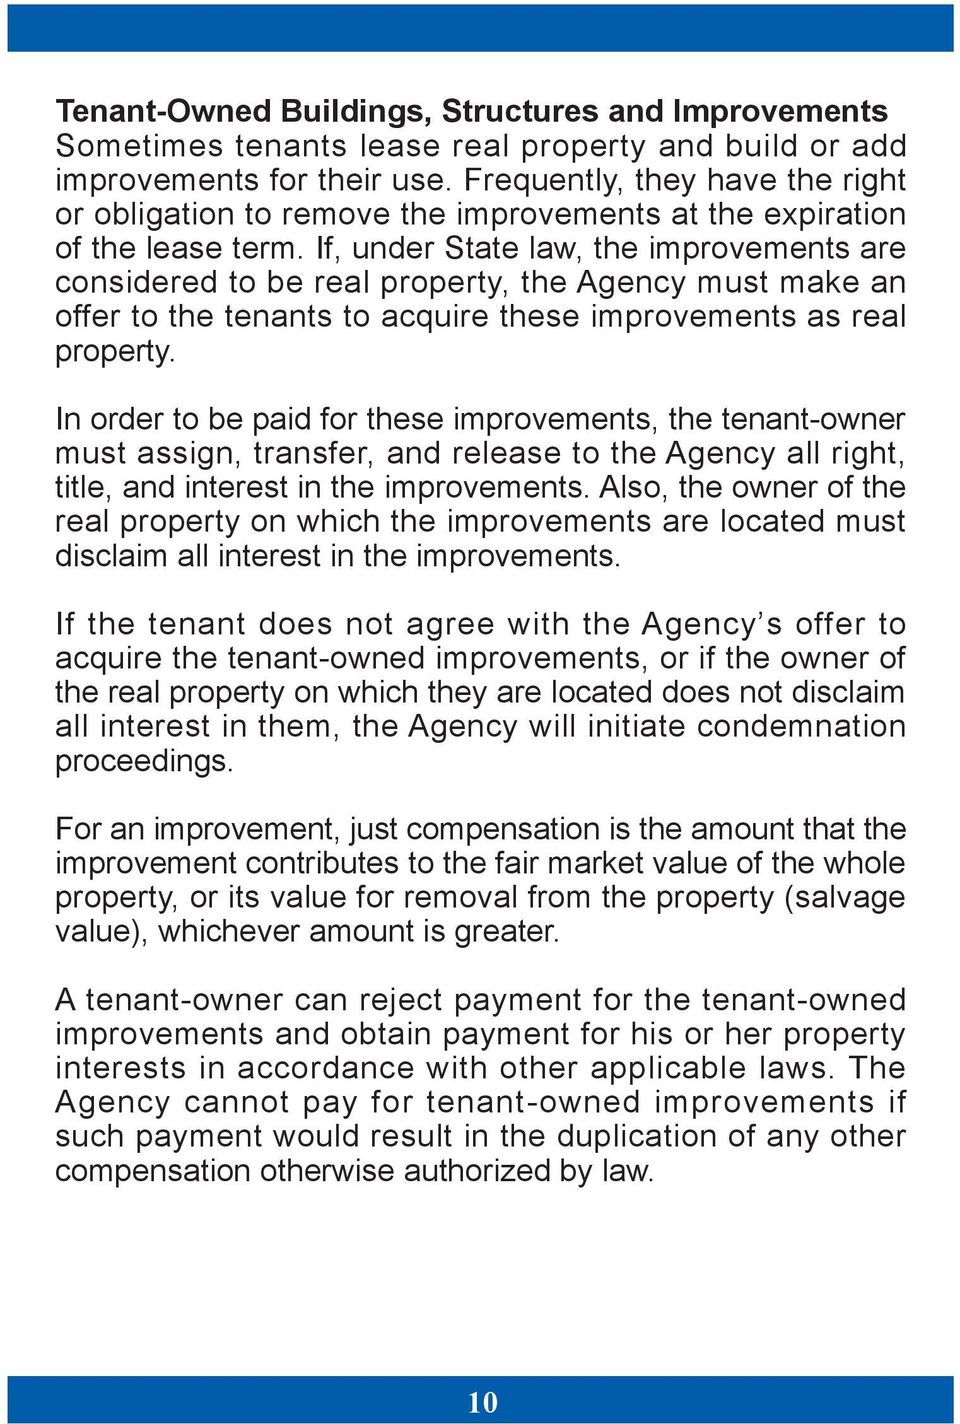 If, under State law, the improvements are considered to be real property, the Agency must make an offer to the tenants to acquire these improvements as real property.